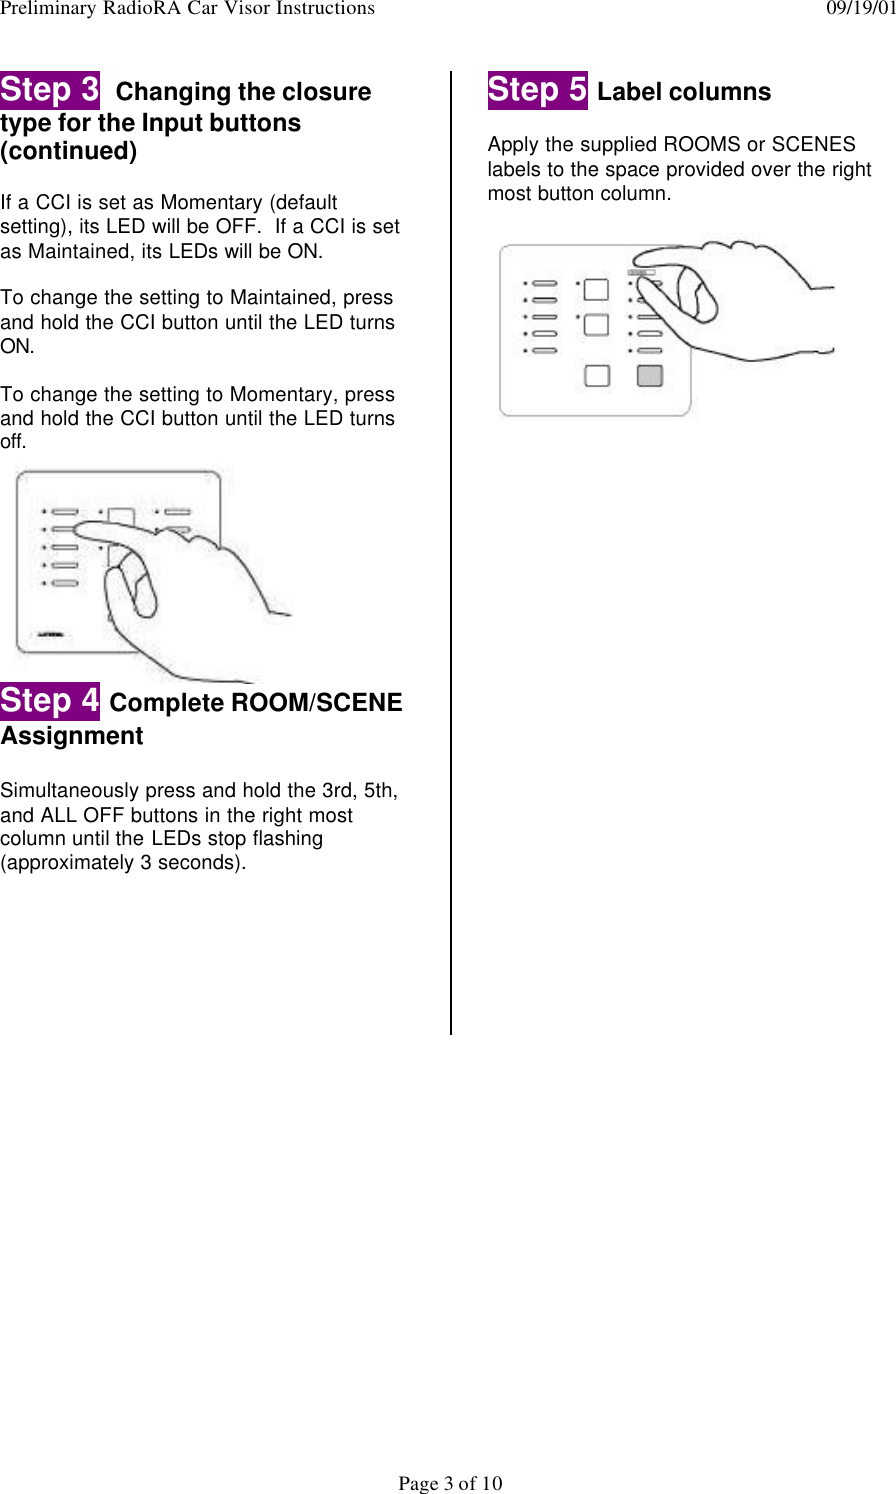 Preliminary RadioRA Car Visor Instructions  09/19/01Page 3 of 10Step 3  Changing the closuretype for the Input buttons(continued)If a CCI is set as Momentary (defaultsetting), its LED will be OFF.  If a CCI is setas Maintained, its LEDs will be ON.To change the setting to Maintained, pressand hold the CCI button until the LED turnsON.To change the setting to Momentary, pressand hold the CCI button until the LED turnsoff.Step 4 Complete ROOM/SCENEAssignmentSimultaneously press and hold the 3rd, 5th,and ALL OFF buttons in the right mostcolumn until the LEDs stop flashing(approximately 3 seconds).Step 5 Label columnsApply the supplied ROOMS or SCENESlabels to the space provided over the rightmost button column.